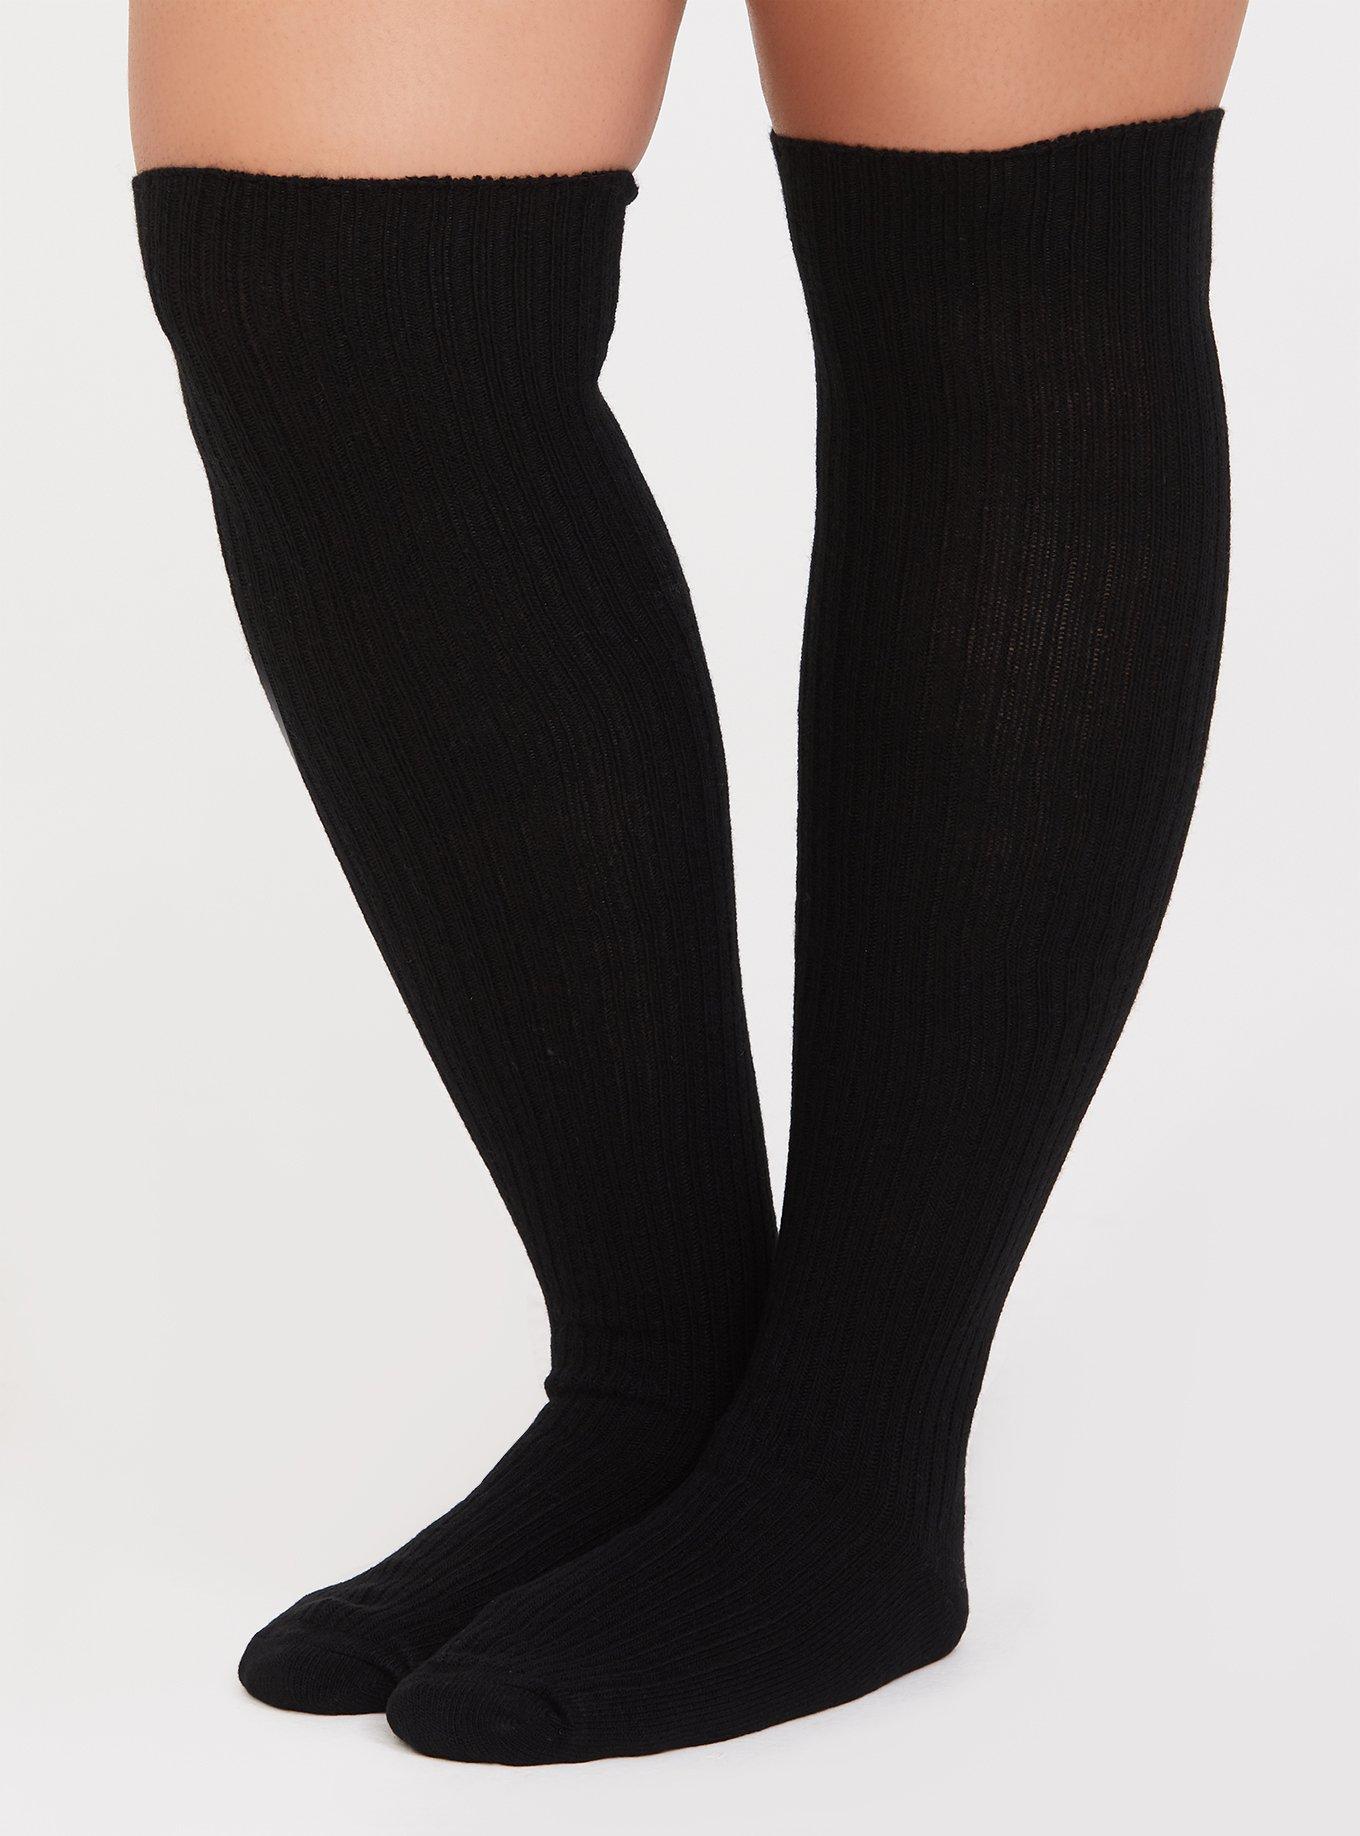 Plus Size - 2 Pack Cable Knit Knee-High Sock - Torrid